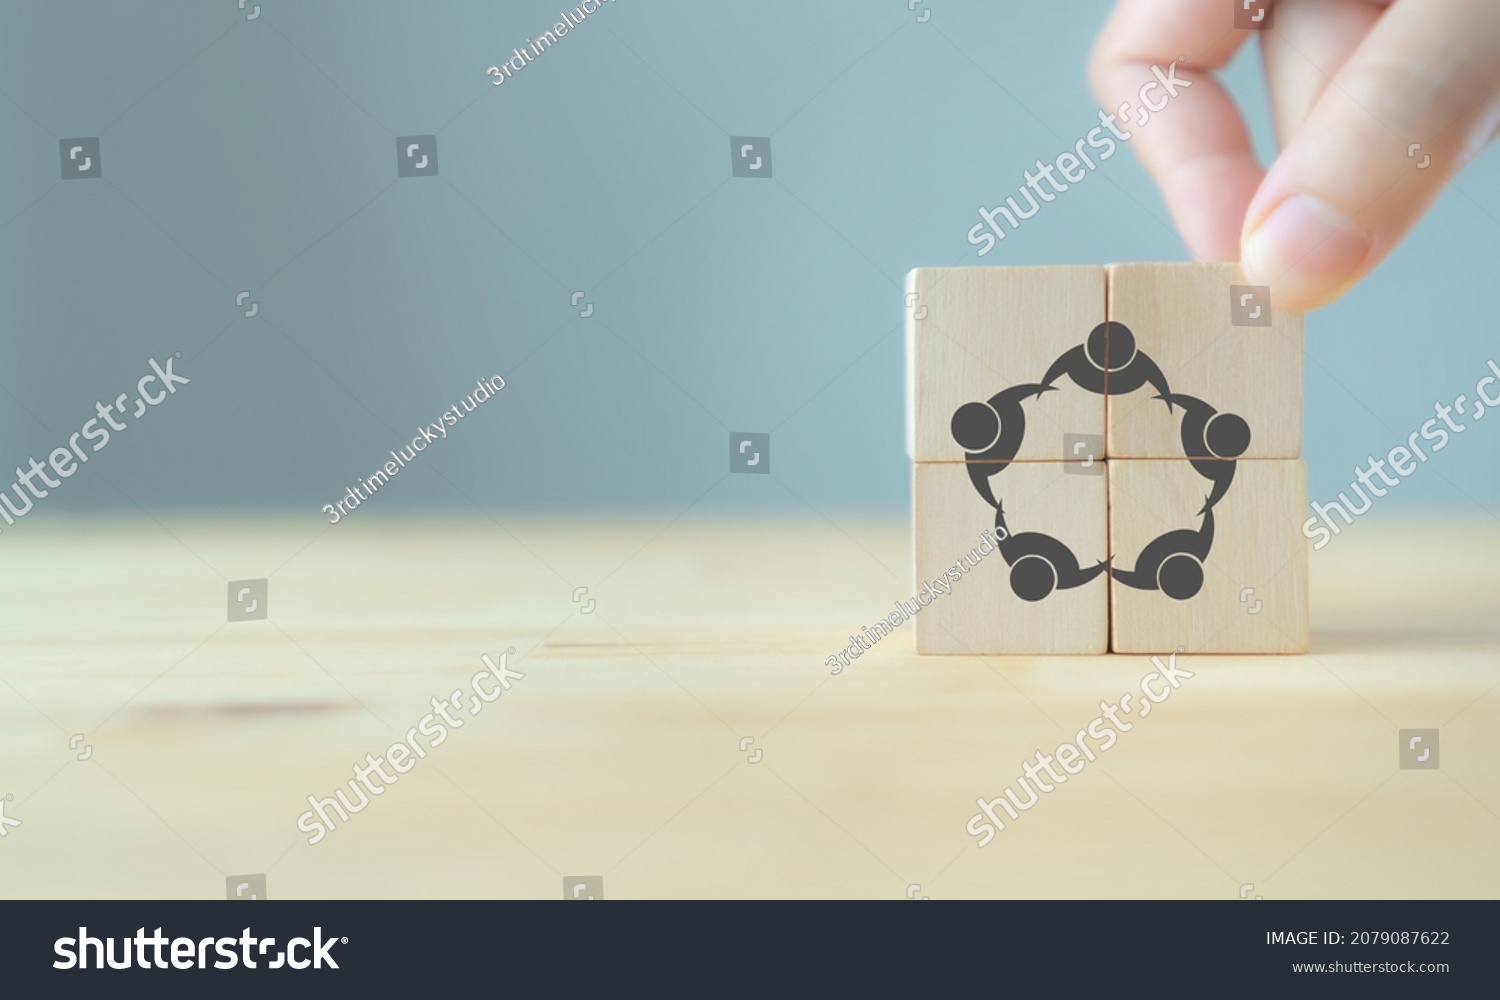 Business management concept; teamwork, collaboration, achieve a common goal. Wooden cube screening teamwork vector icon  standing on the wood table with grey background, copy space.  #2079087622